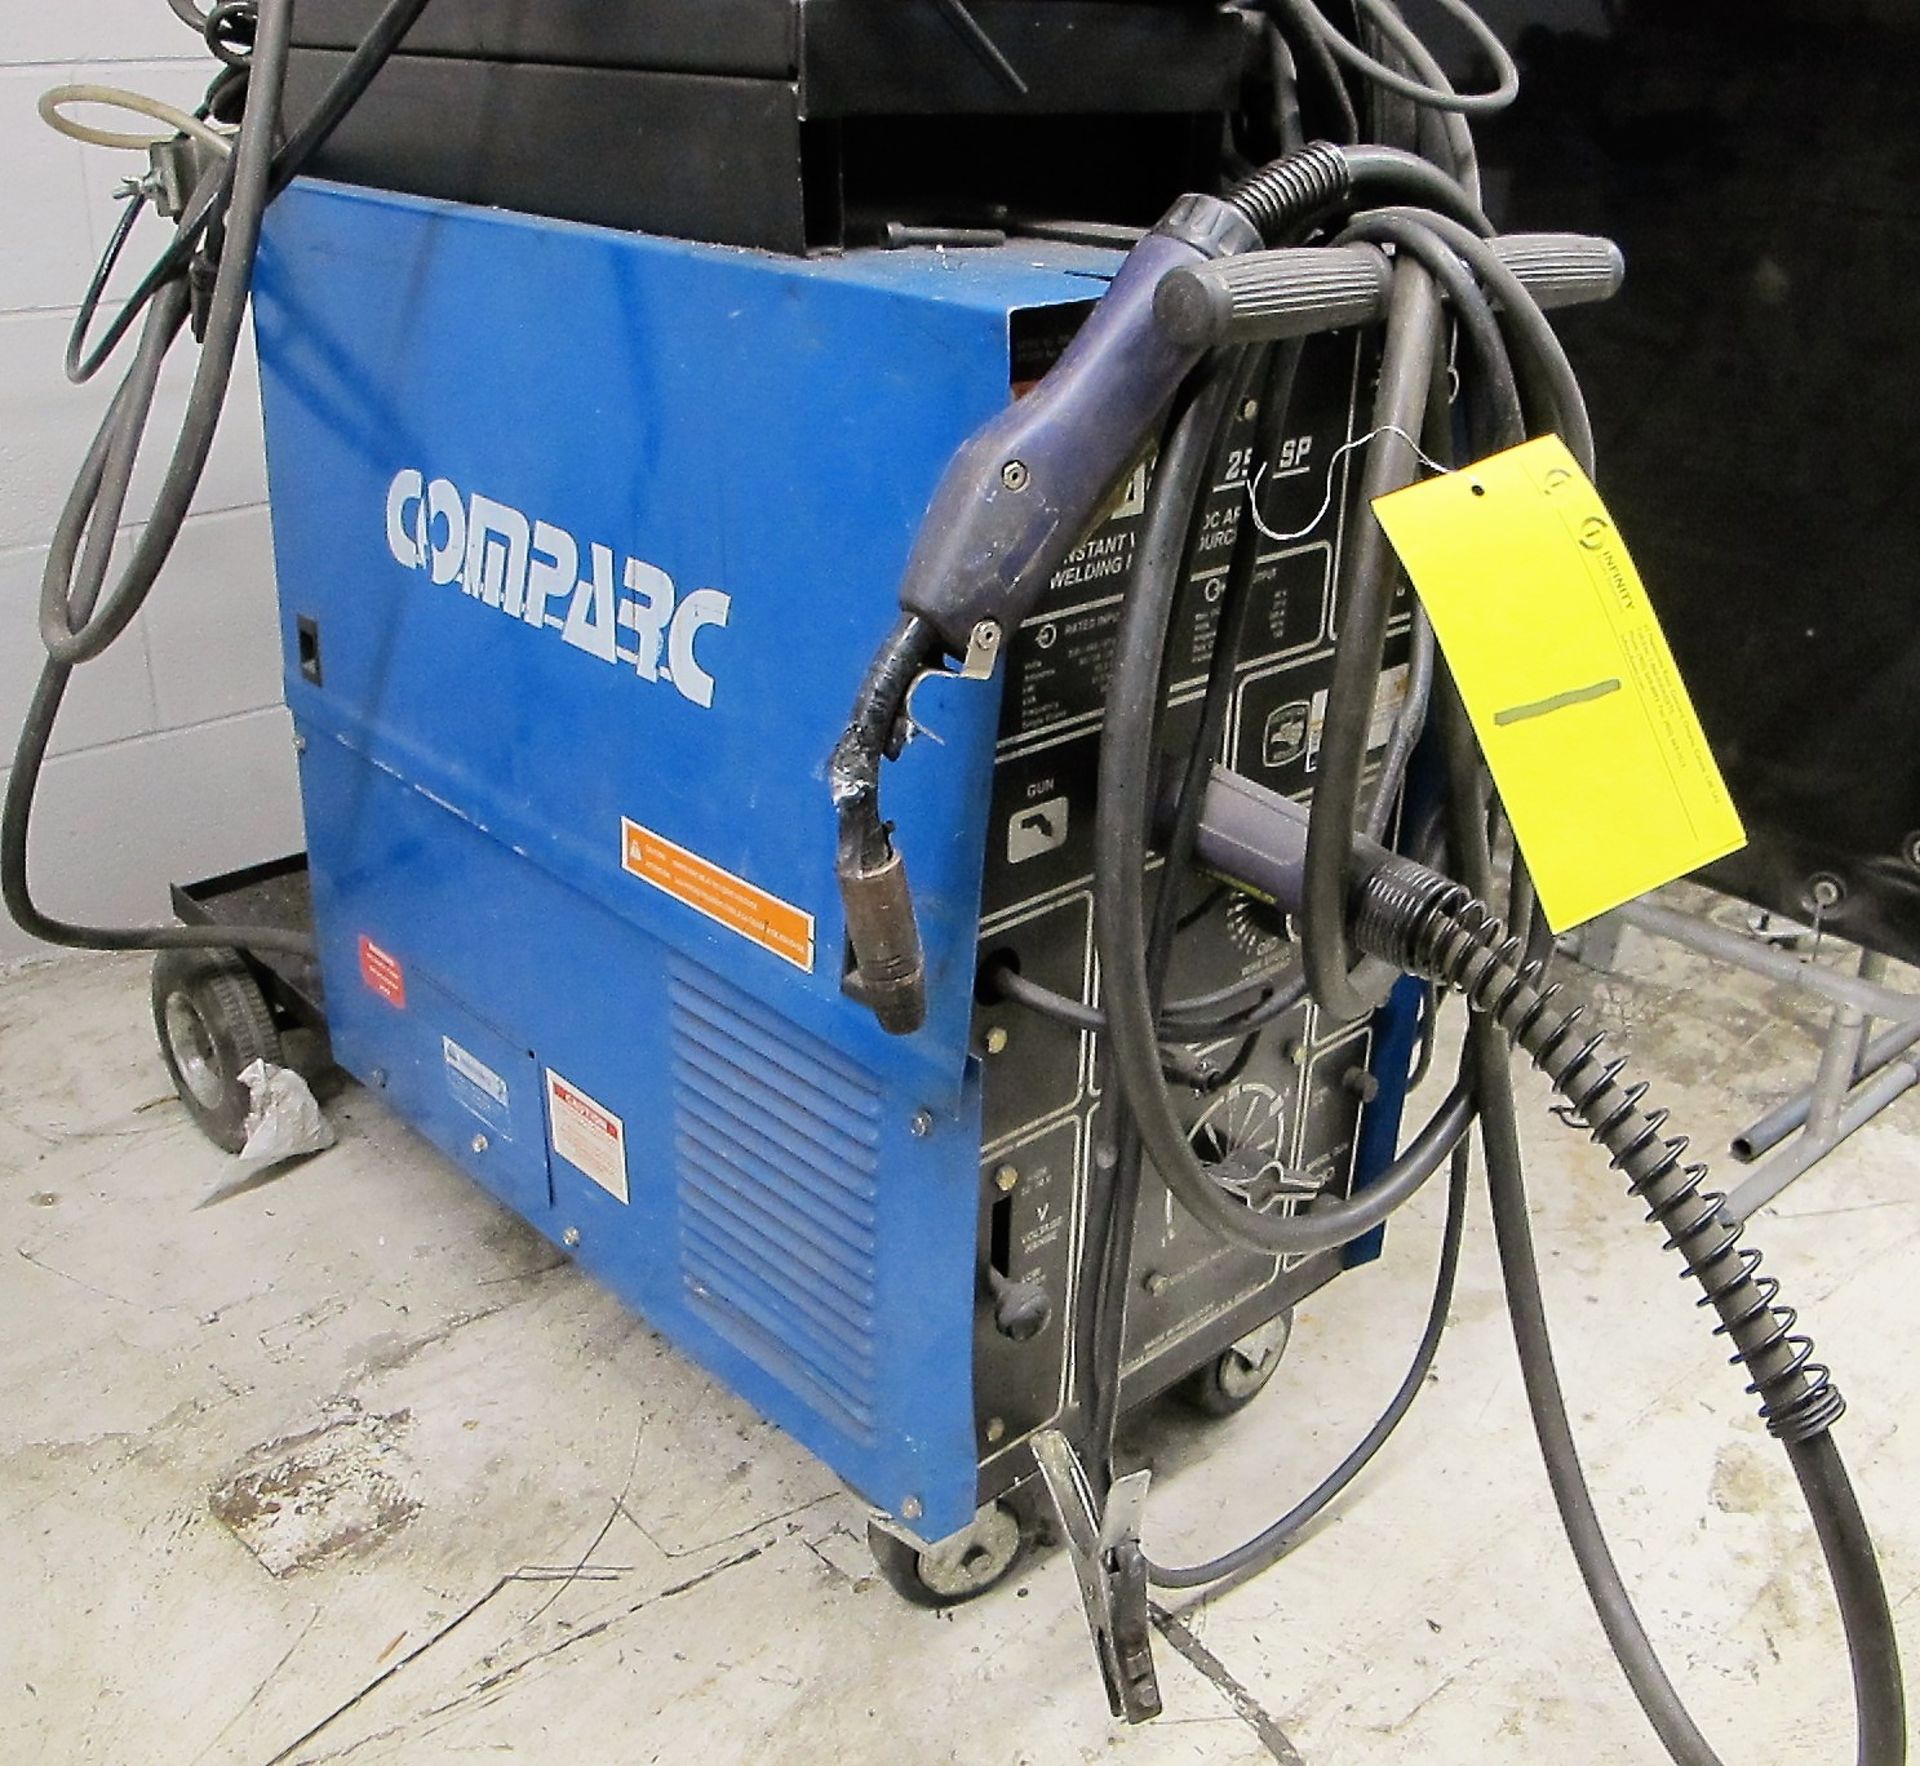 COMPARC 250 SP MIG WELDER W/CABLES, GUN AND CART - Image 2 of 3